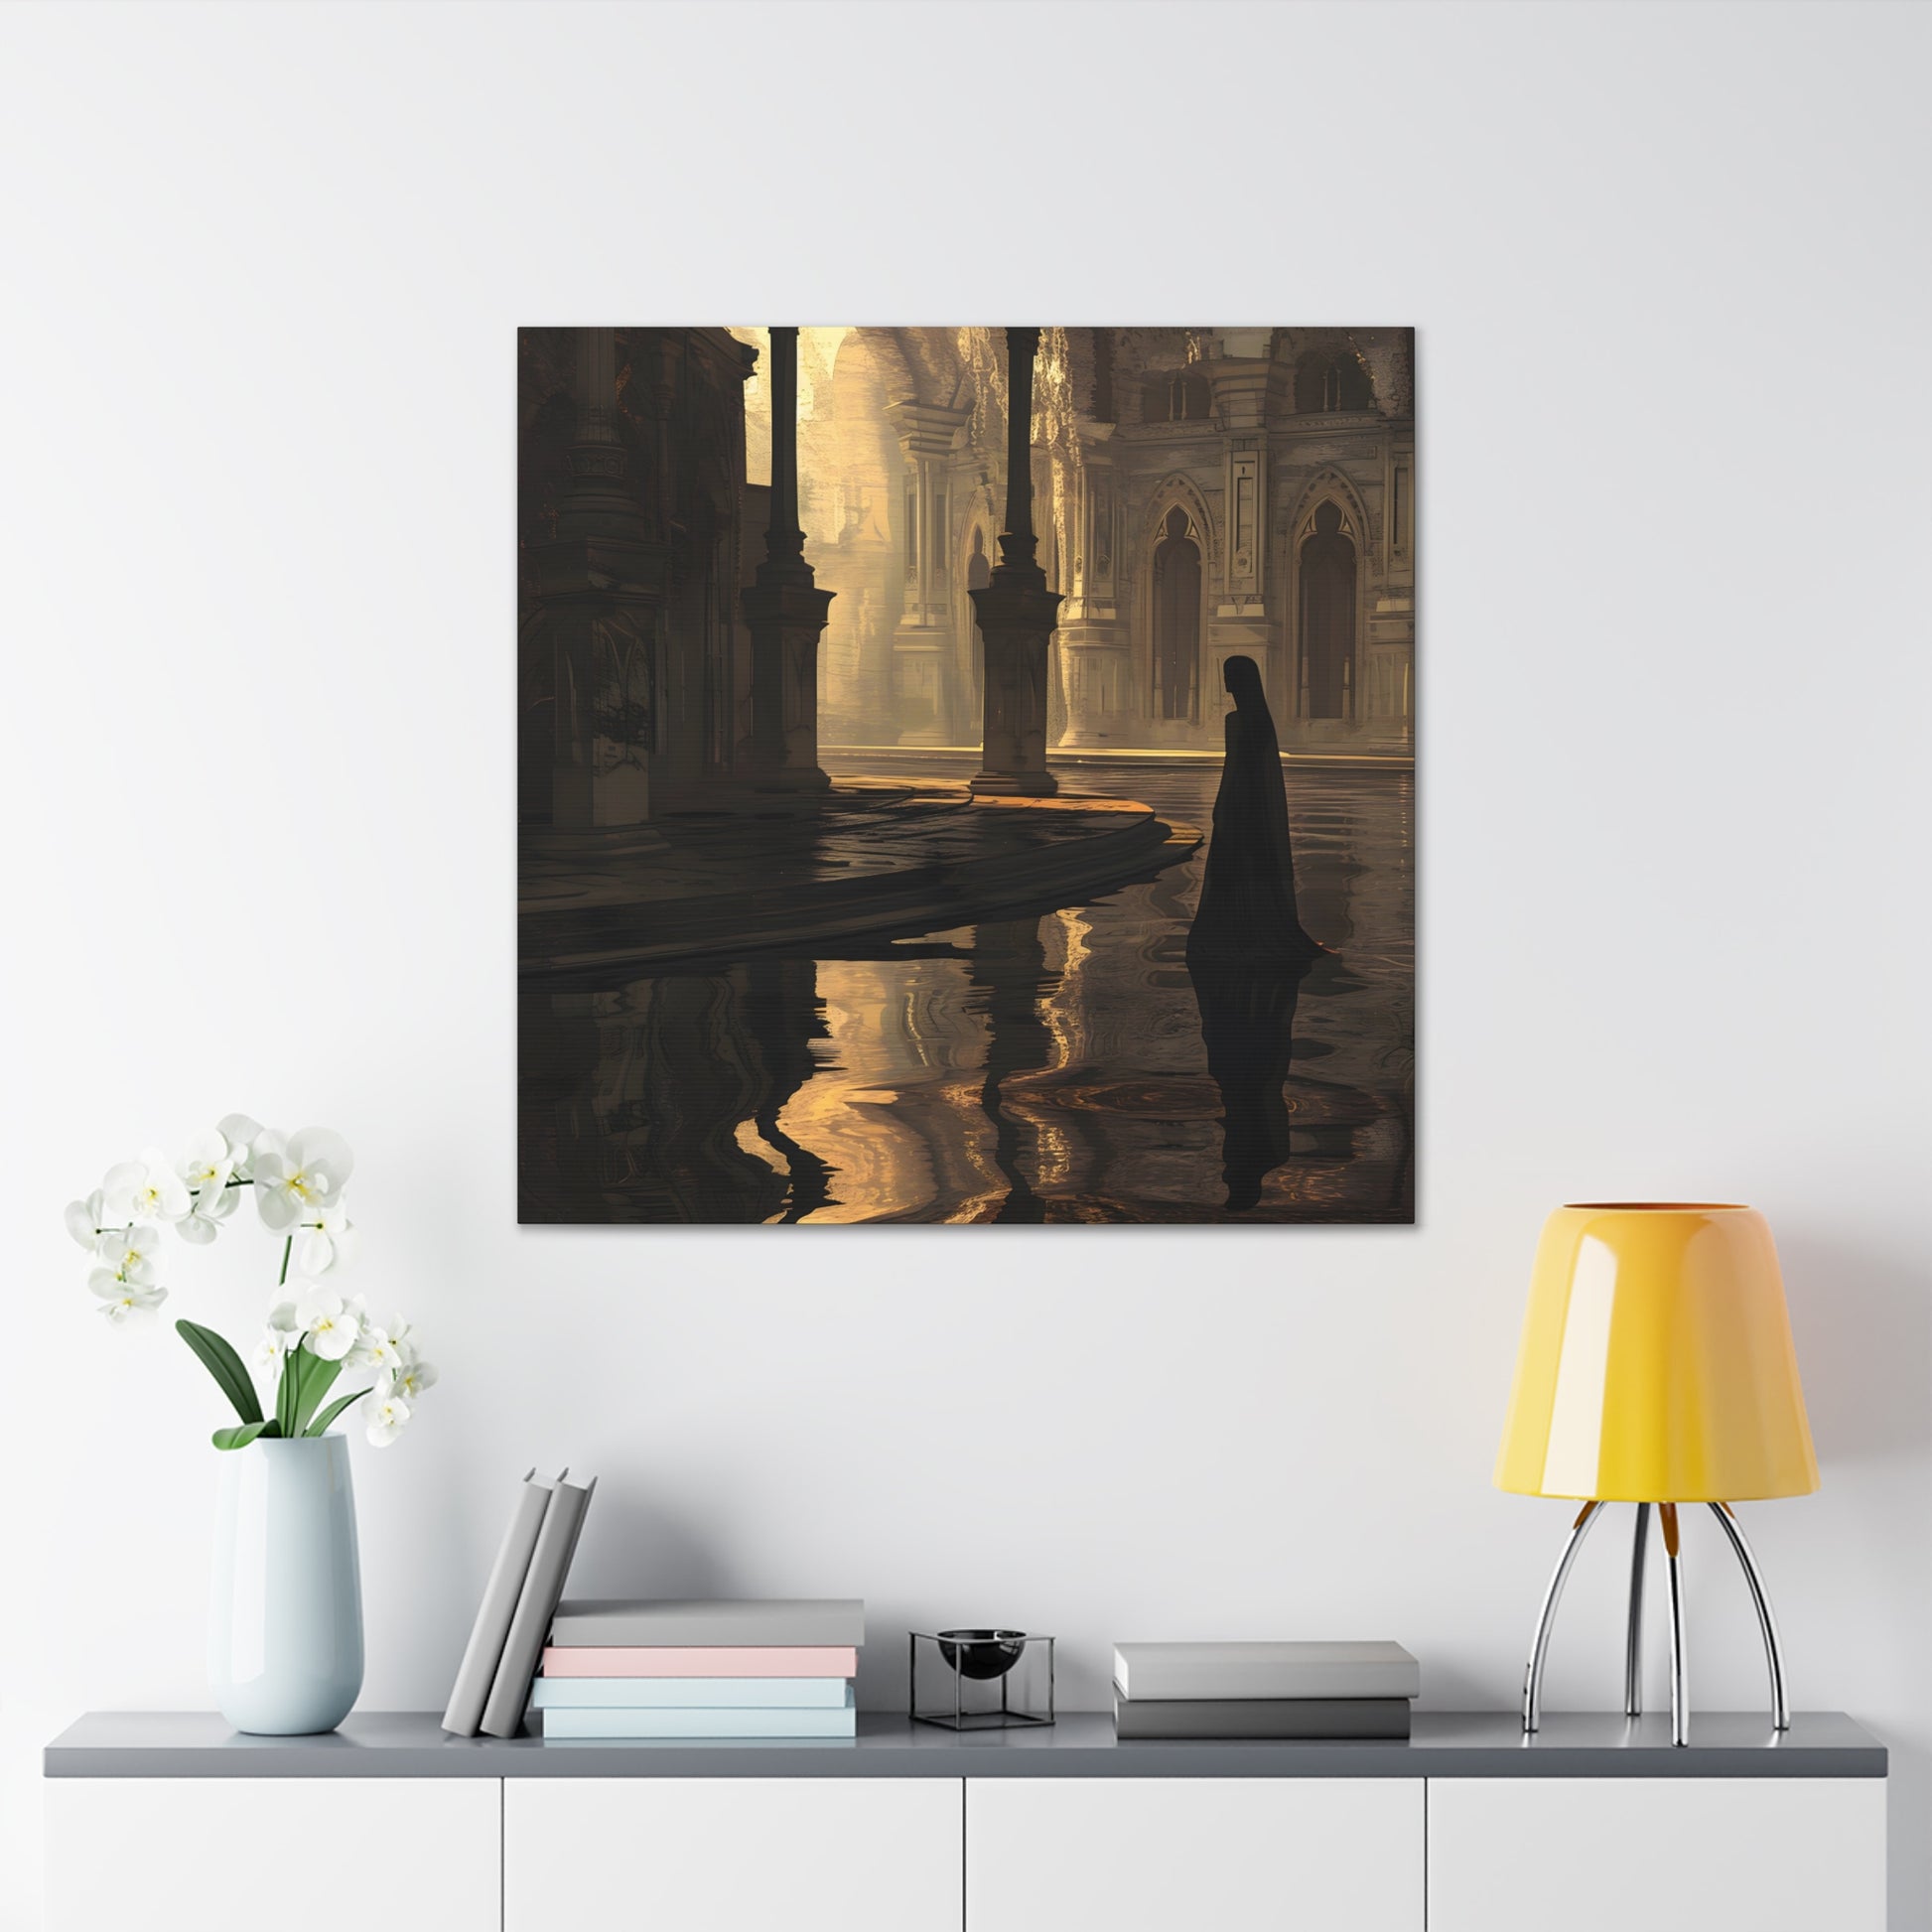 in situ 3 Avery Pennington's artwork of a golden-lit, flooded cathedral with a solitary figure in black, blending Gothic architecture with reflections in water, evoking solitude and introspection